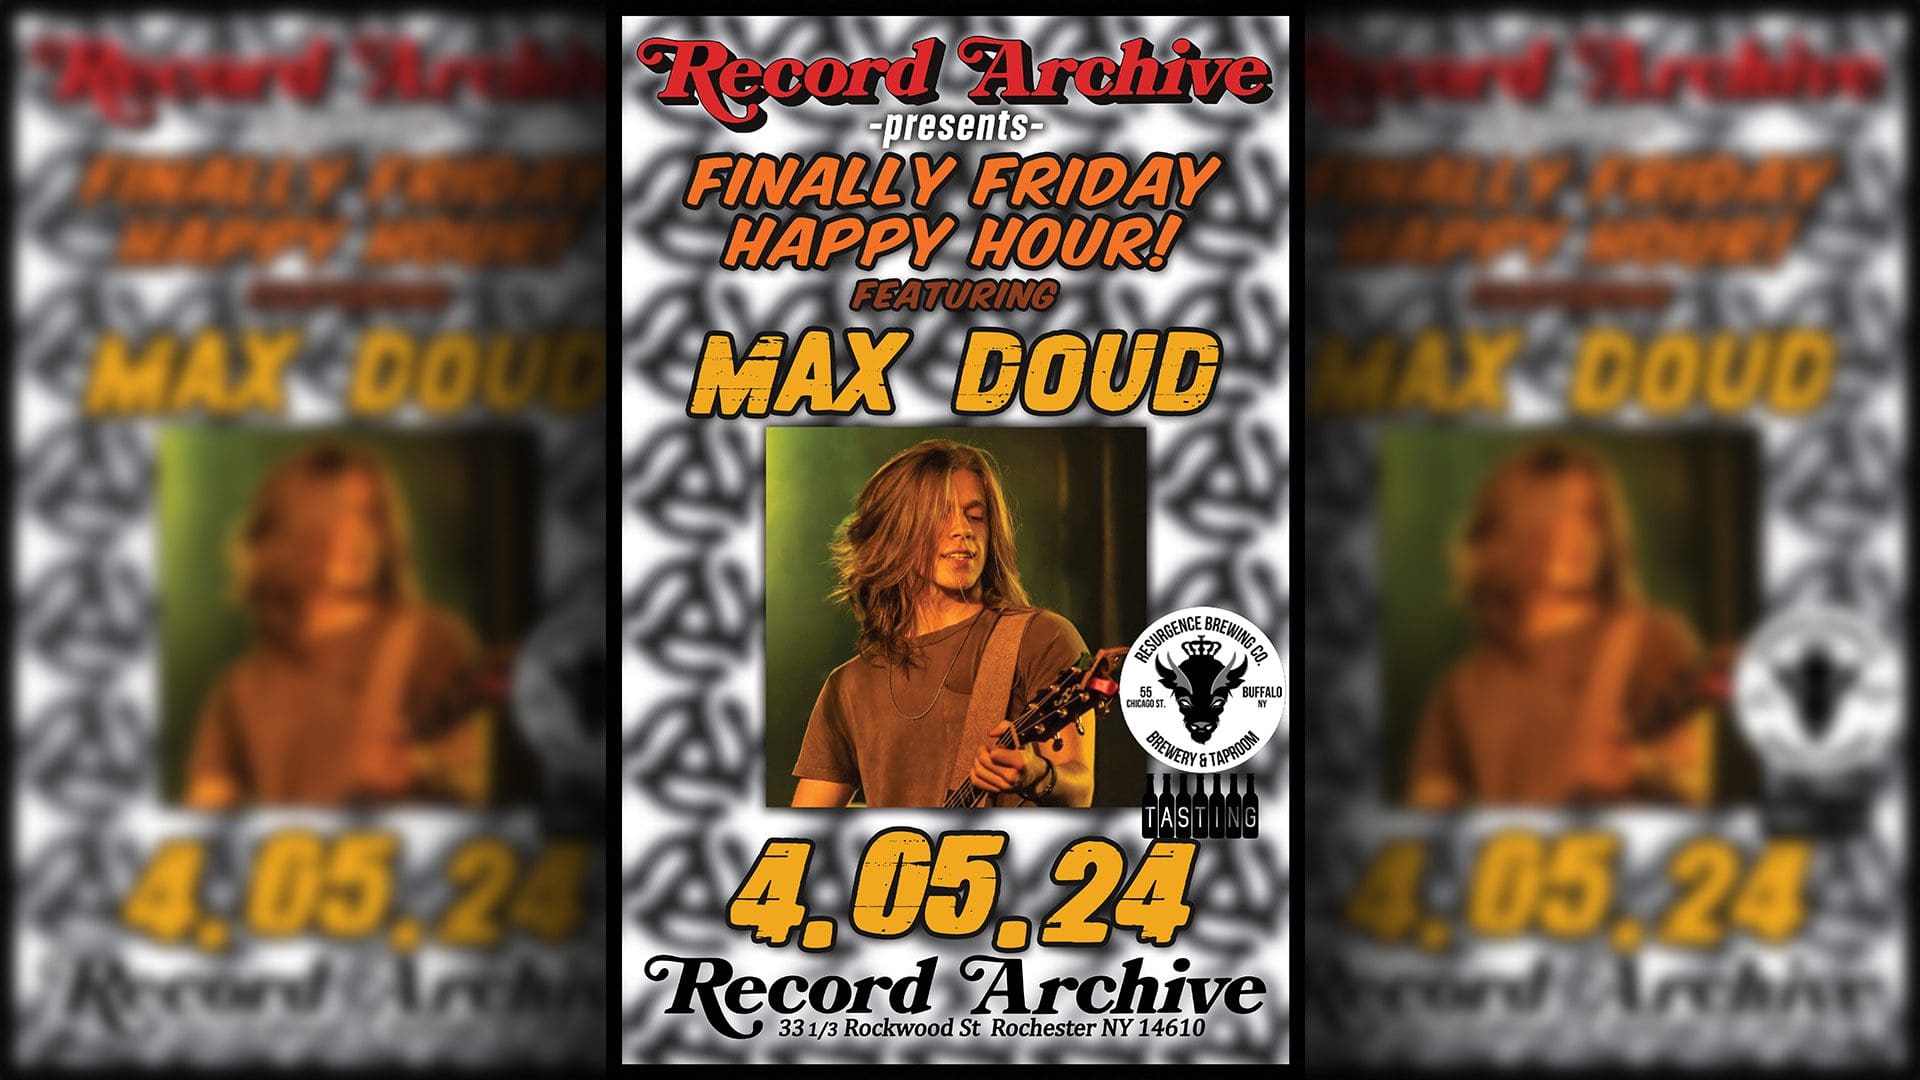 Record Archive presents Finally Friday Happy Hour featuring Max Doud. Resurgence Brewery tasting. 4.05.24. Record Archive 33 1/3 Rockwood St Rochester NY 14610